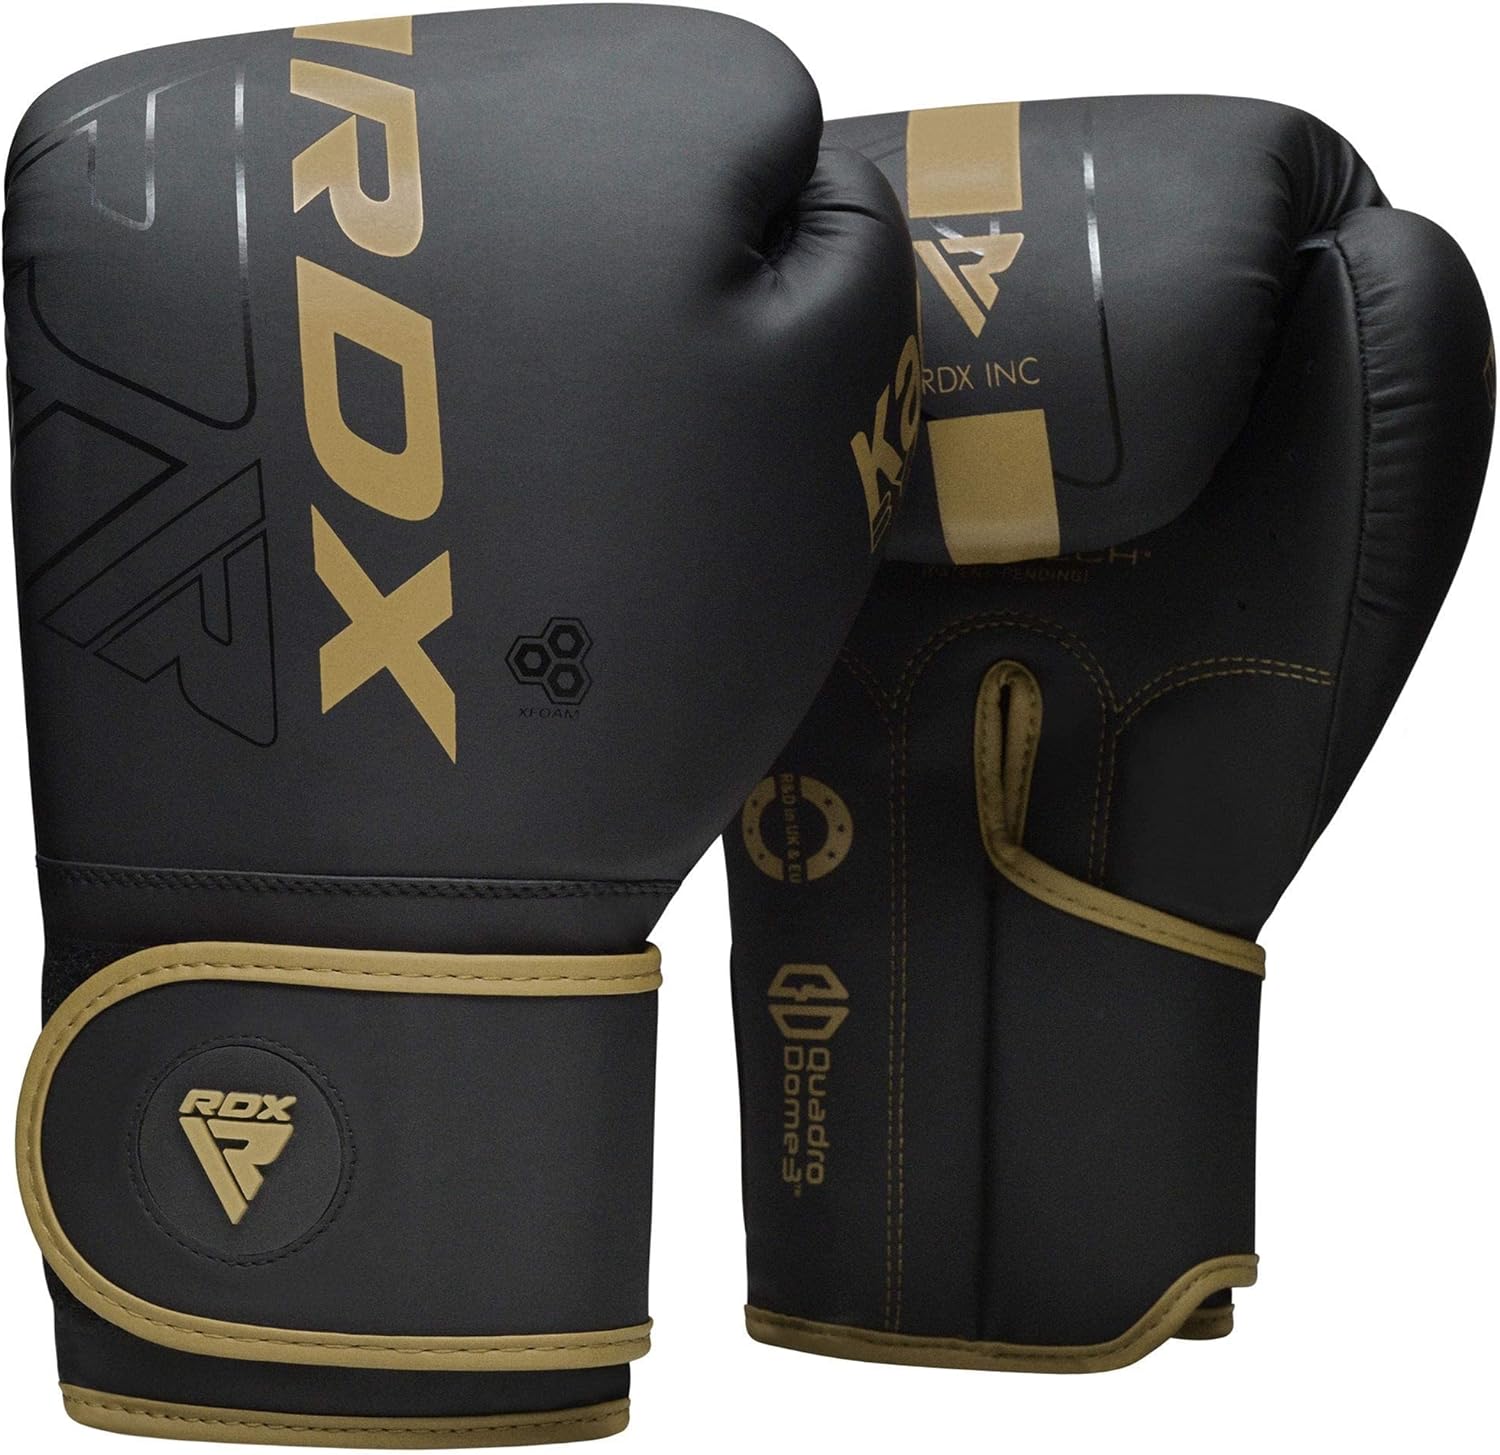 Eclipse Martial Art Supplies Training Gloves GOLDEN / 12 OZ RDX Boxing Gloves Men Women, Pro Training Sparring, Maya Hide Leather Muay Thai MMA Kickboxing, Adult Heavy Punching Bag Gloves Mitts Focus Pad Workout, Ventilated Palm